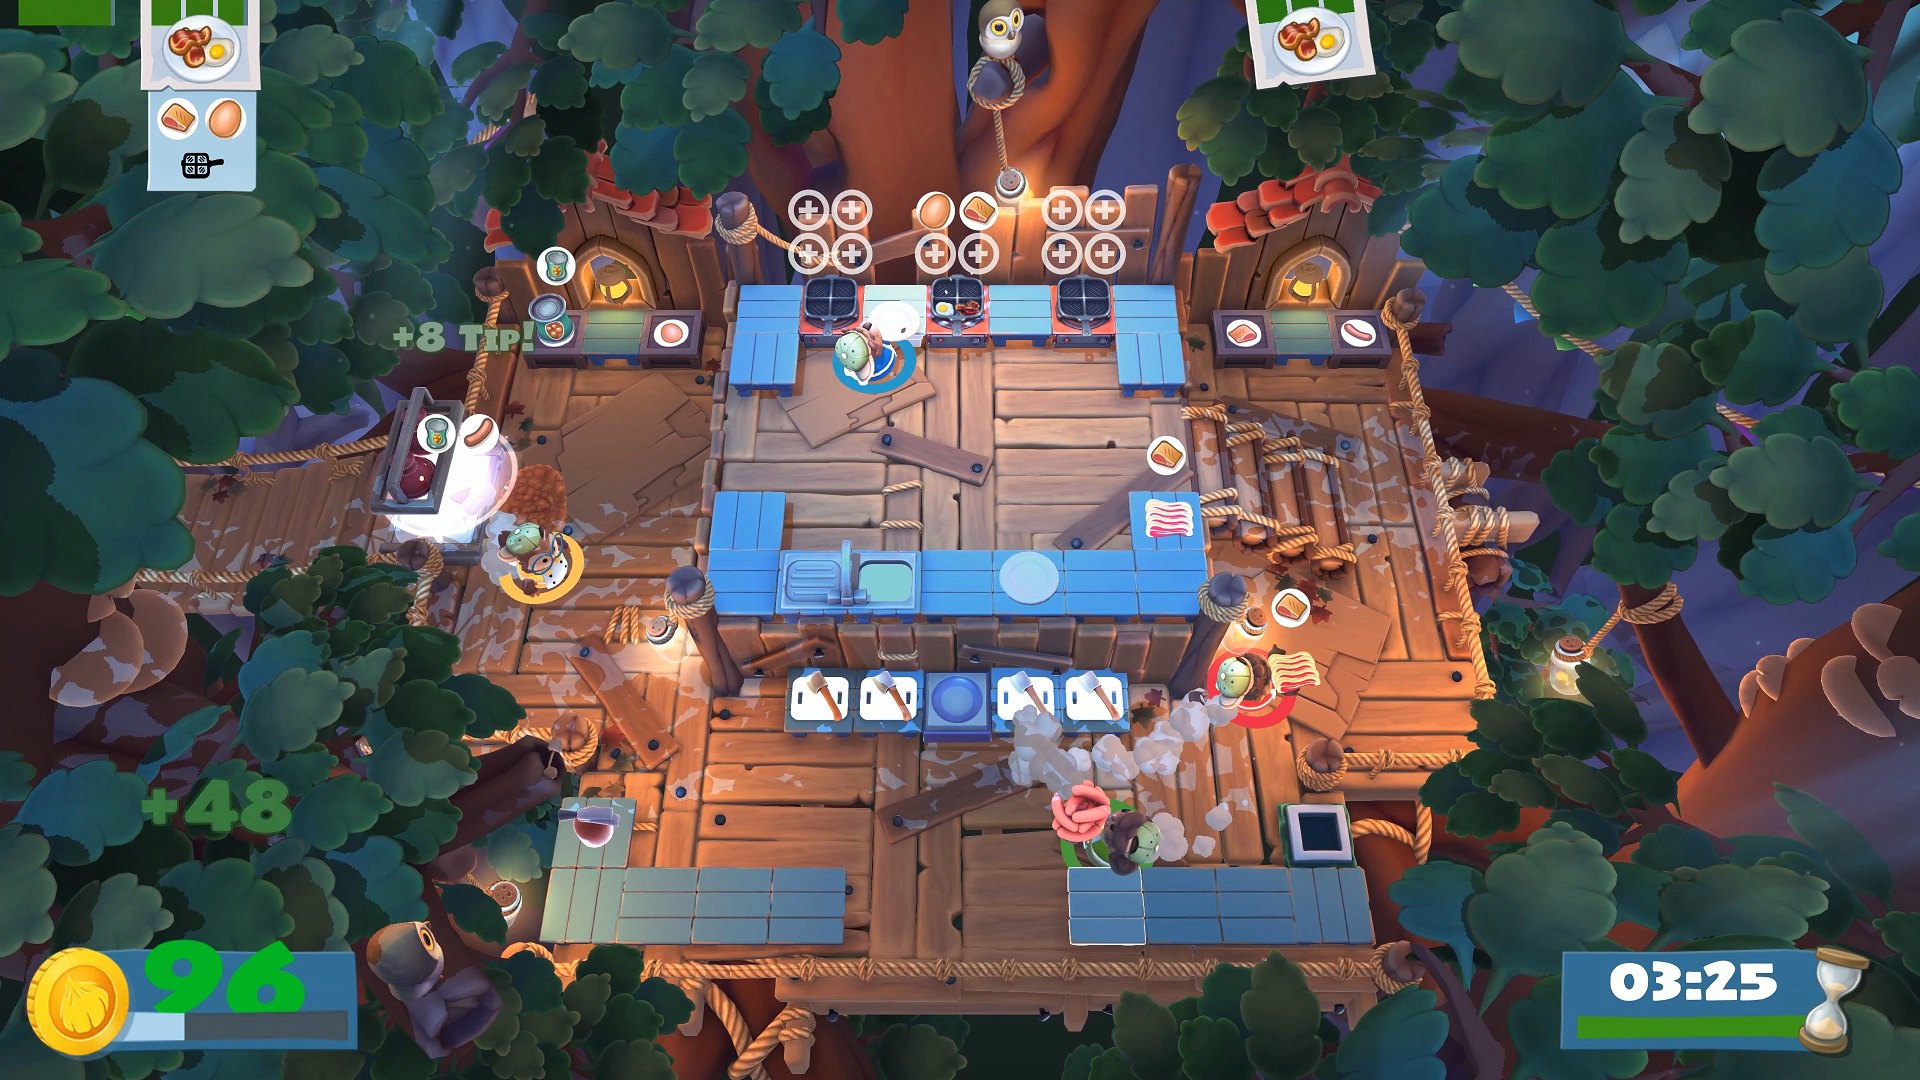 [$ 2.1] Overcooked! 2 - Campfire Cook Off DLC Steam CD Key